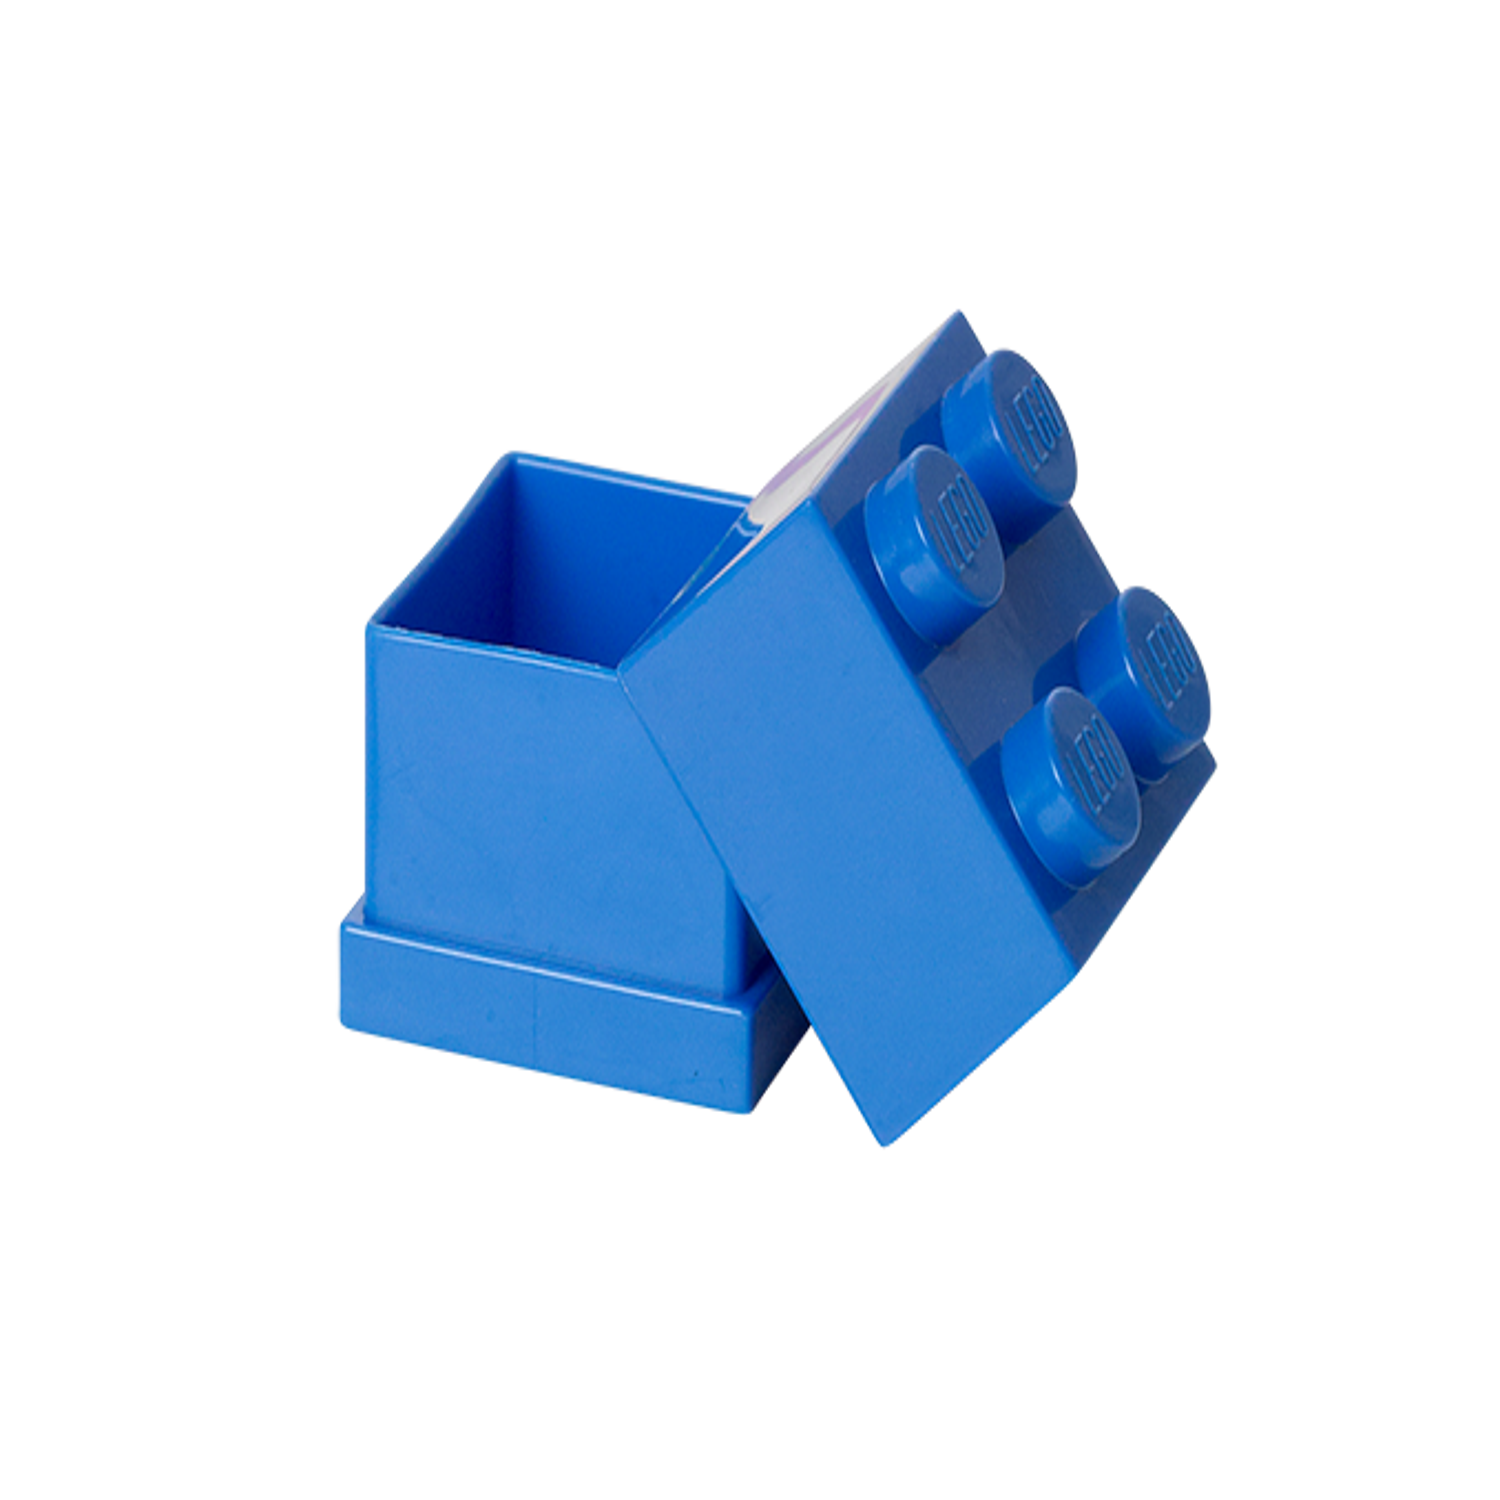 Discount & Cheap LEGO Lunch Box Classic - Blue Online at the Shop